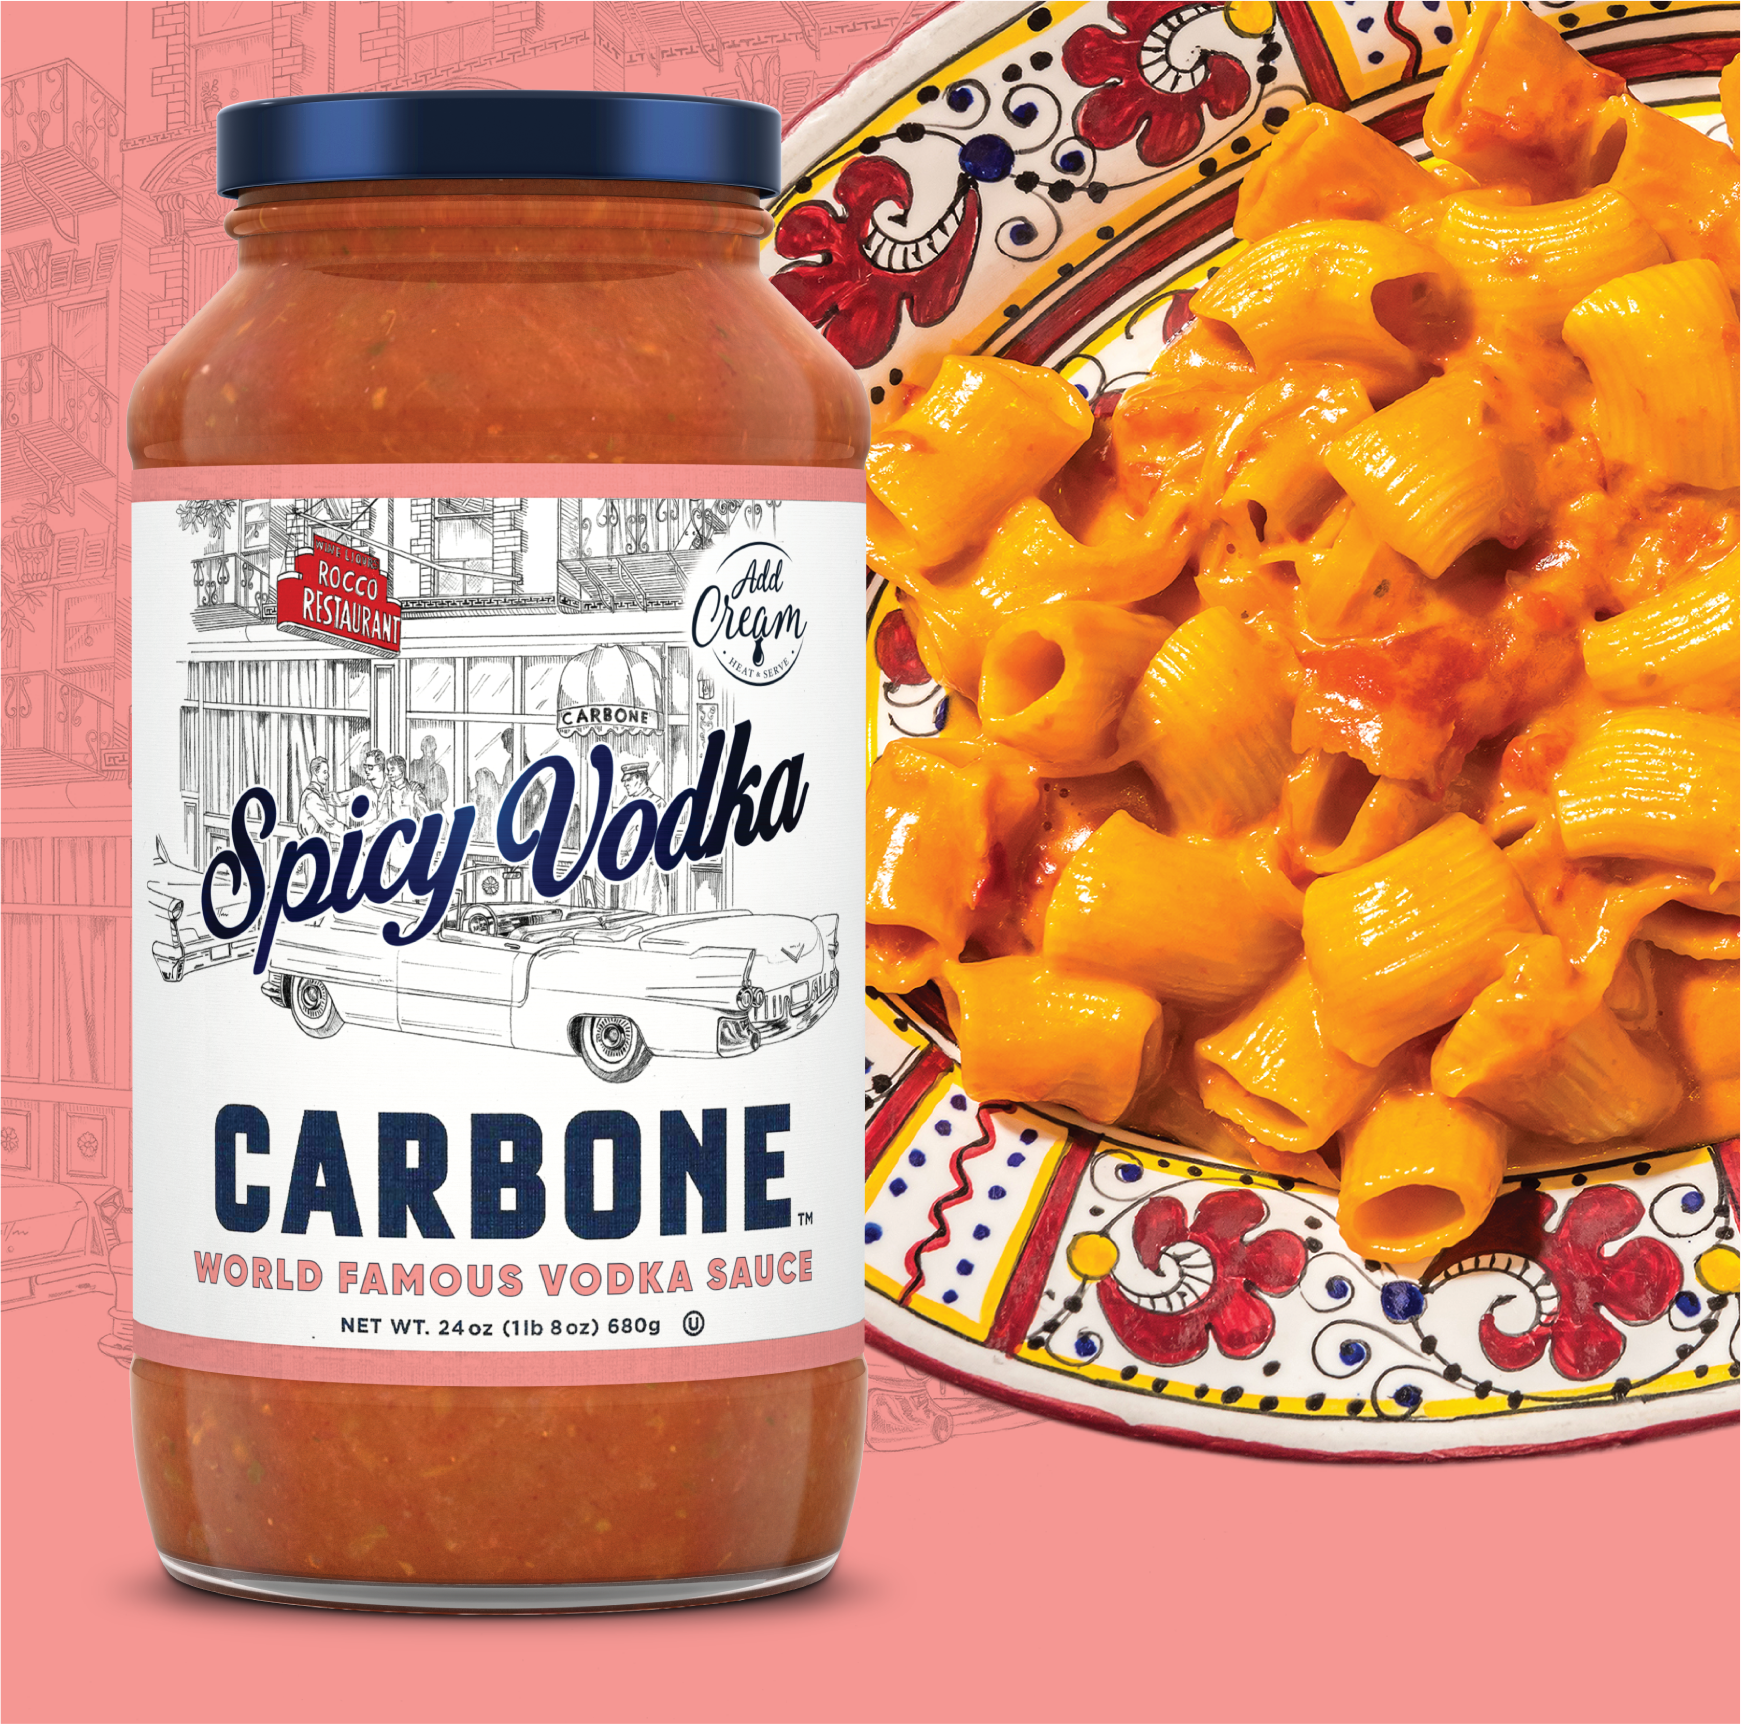 The world famous spicy vodka sauce is now available for purchase online.